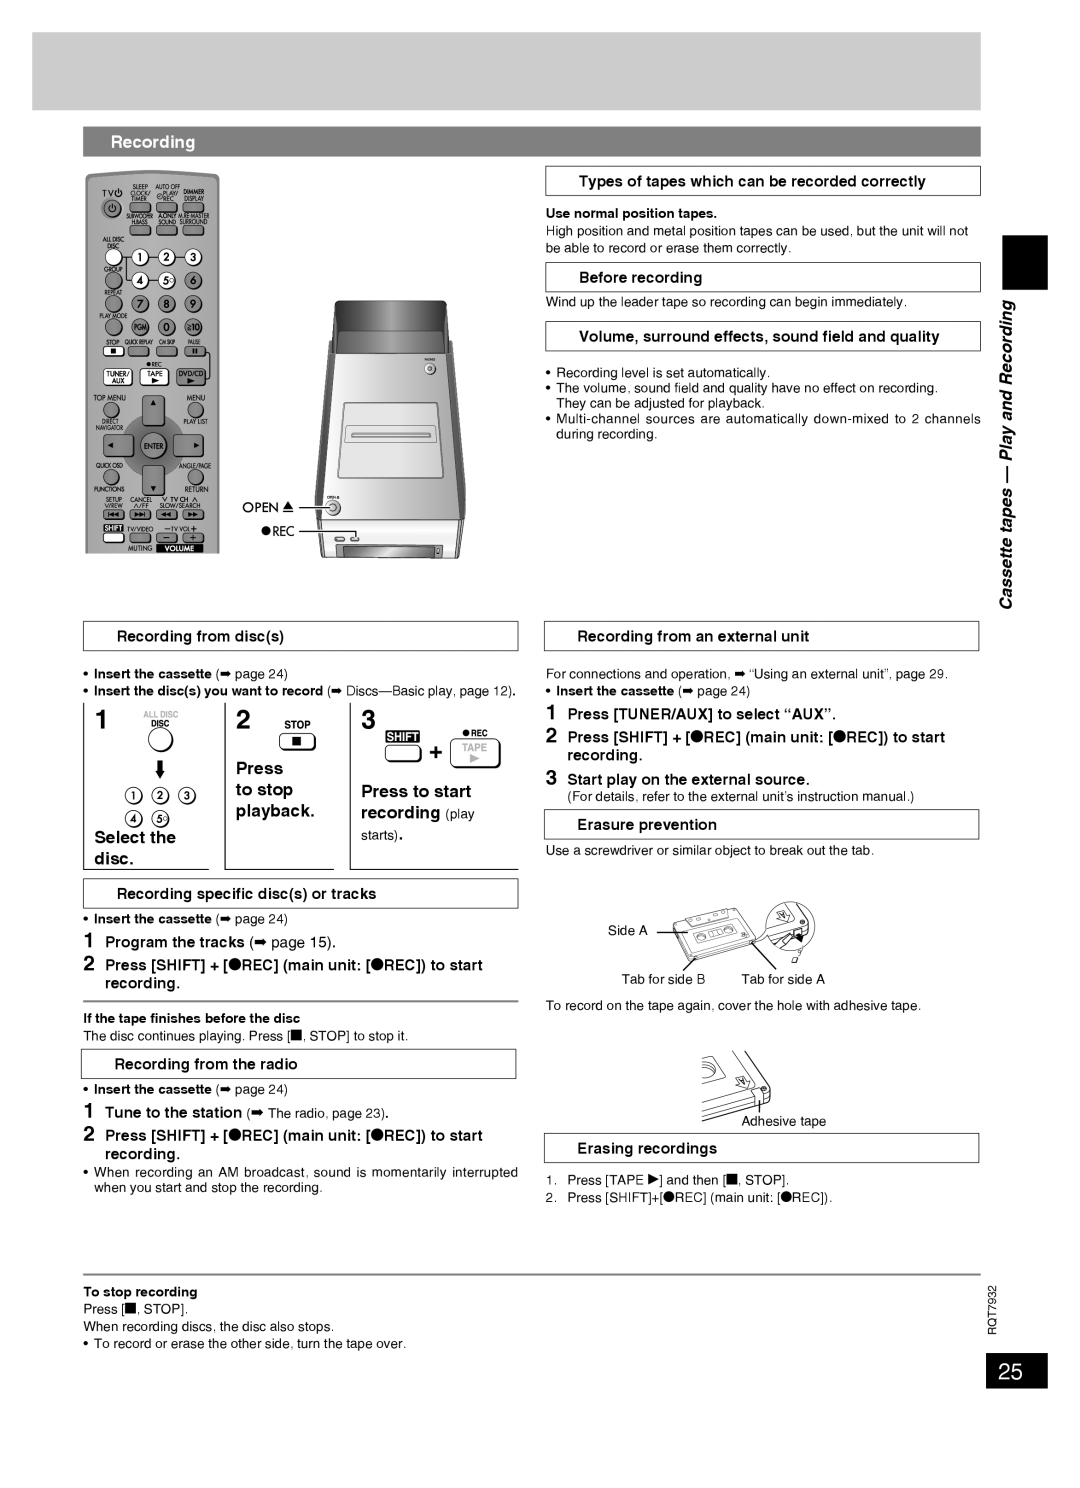 Panasonic SC-PM91D important safety instructions Recording, Cassette tapes - Play, Select the disc, Press to stop playback 